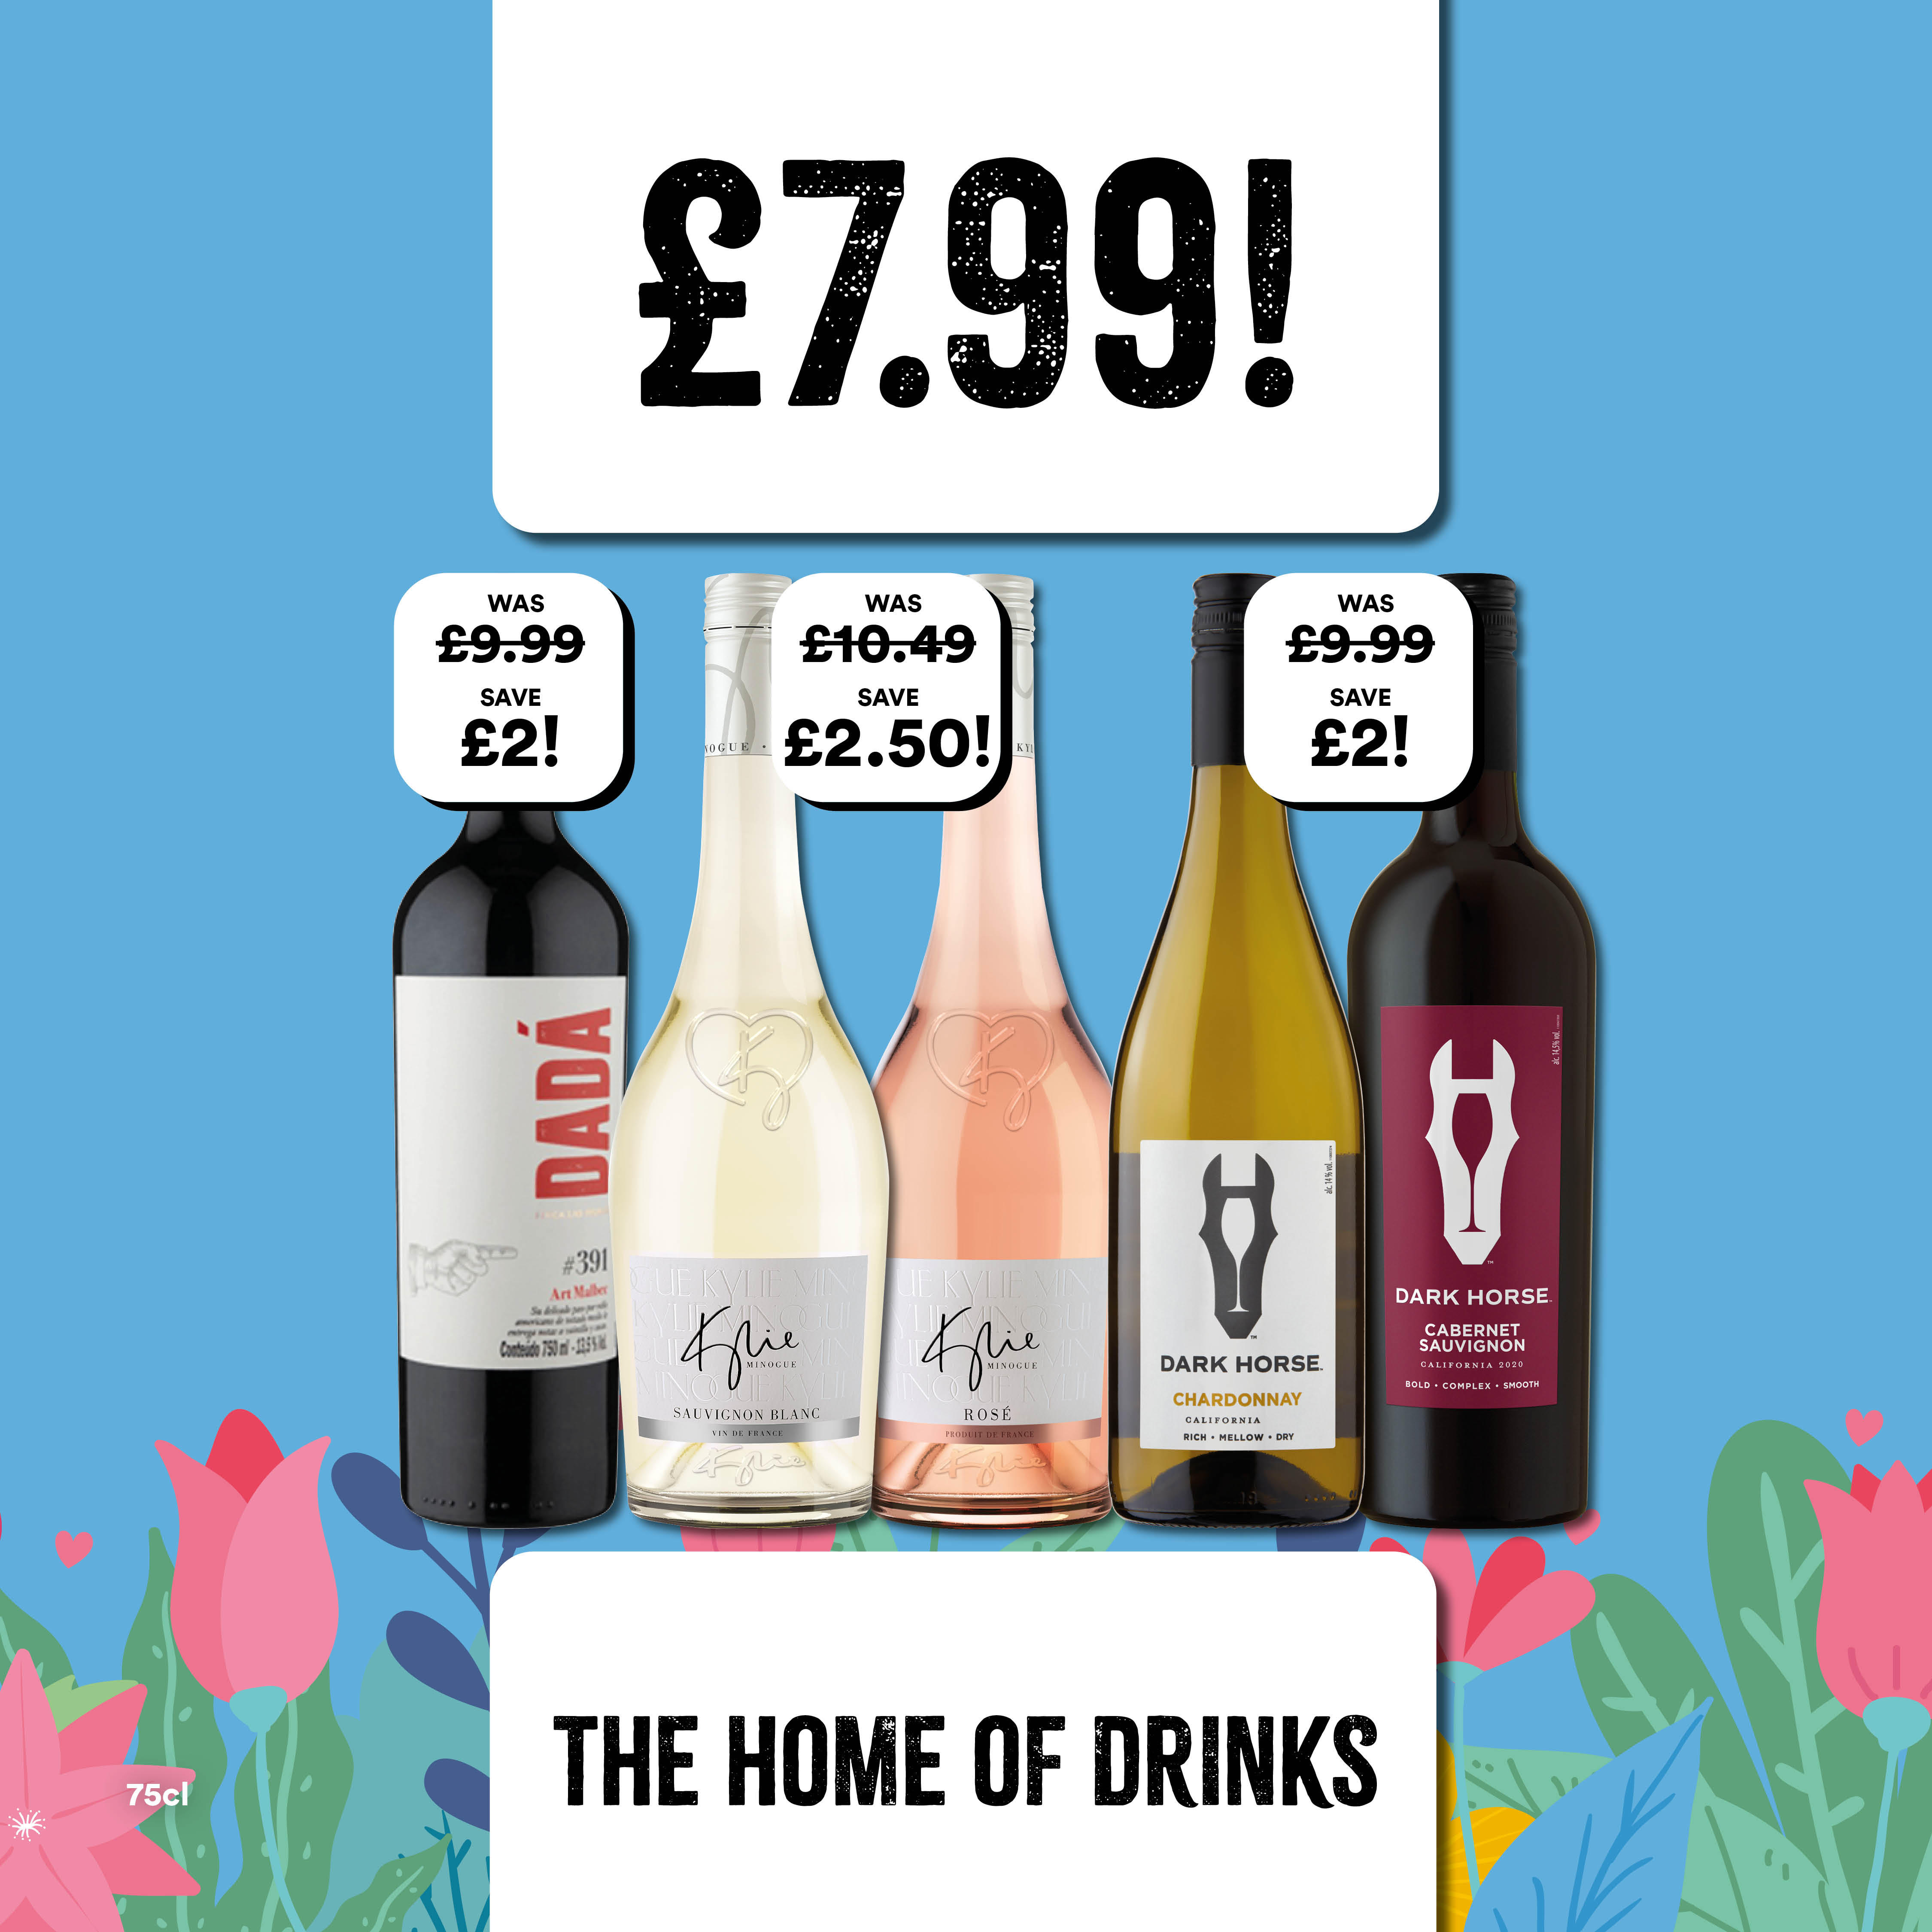 Only £7.99 On selcted wines Bargain Booze Liverpool 01515 317446